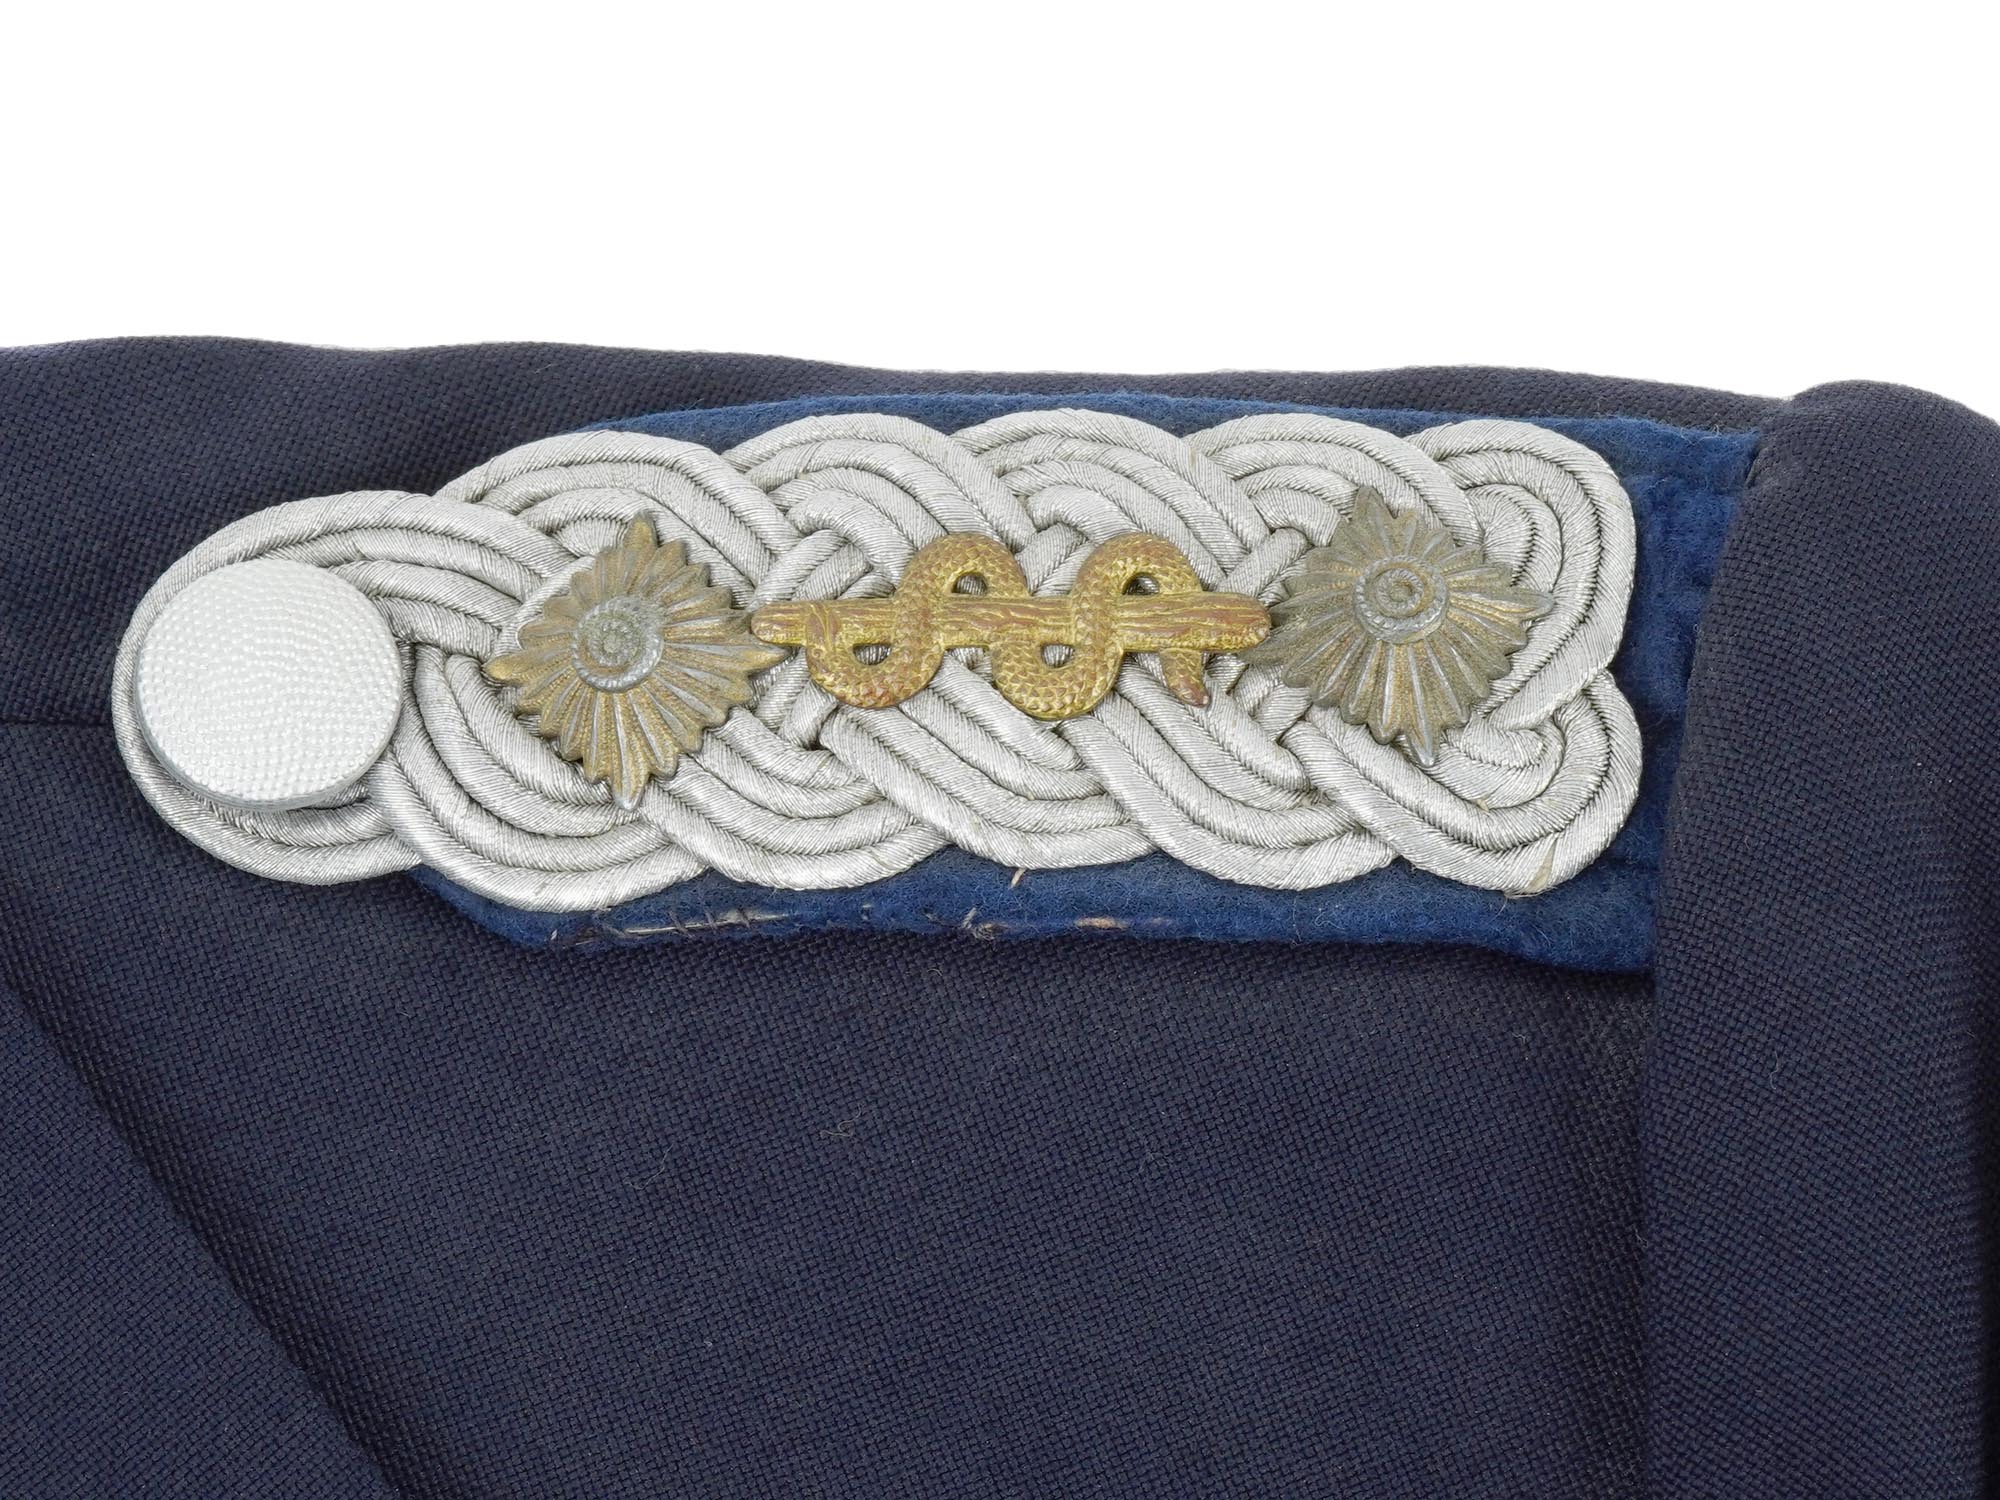 WWII GERMAN LUFTWAFFE MEDICAL DRESS TUNIC WITH AIGUILLETTE PIC-3